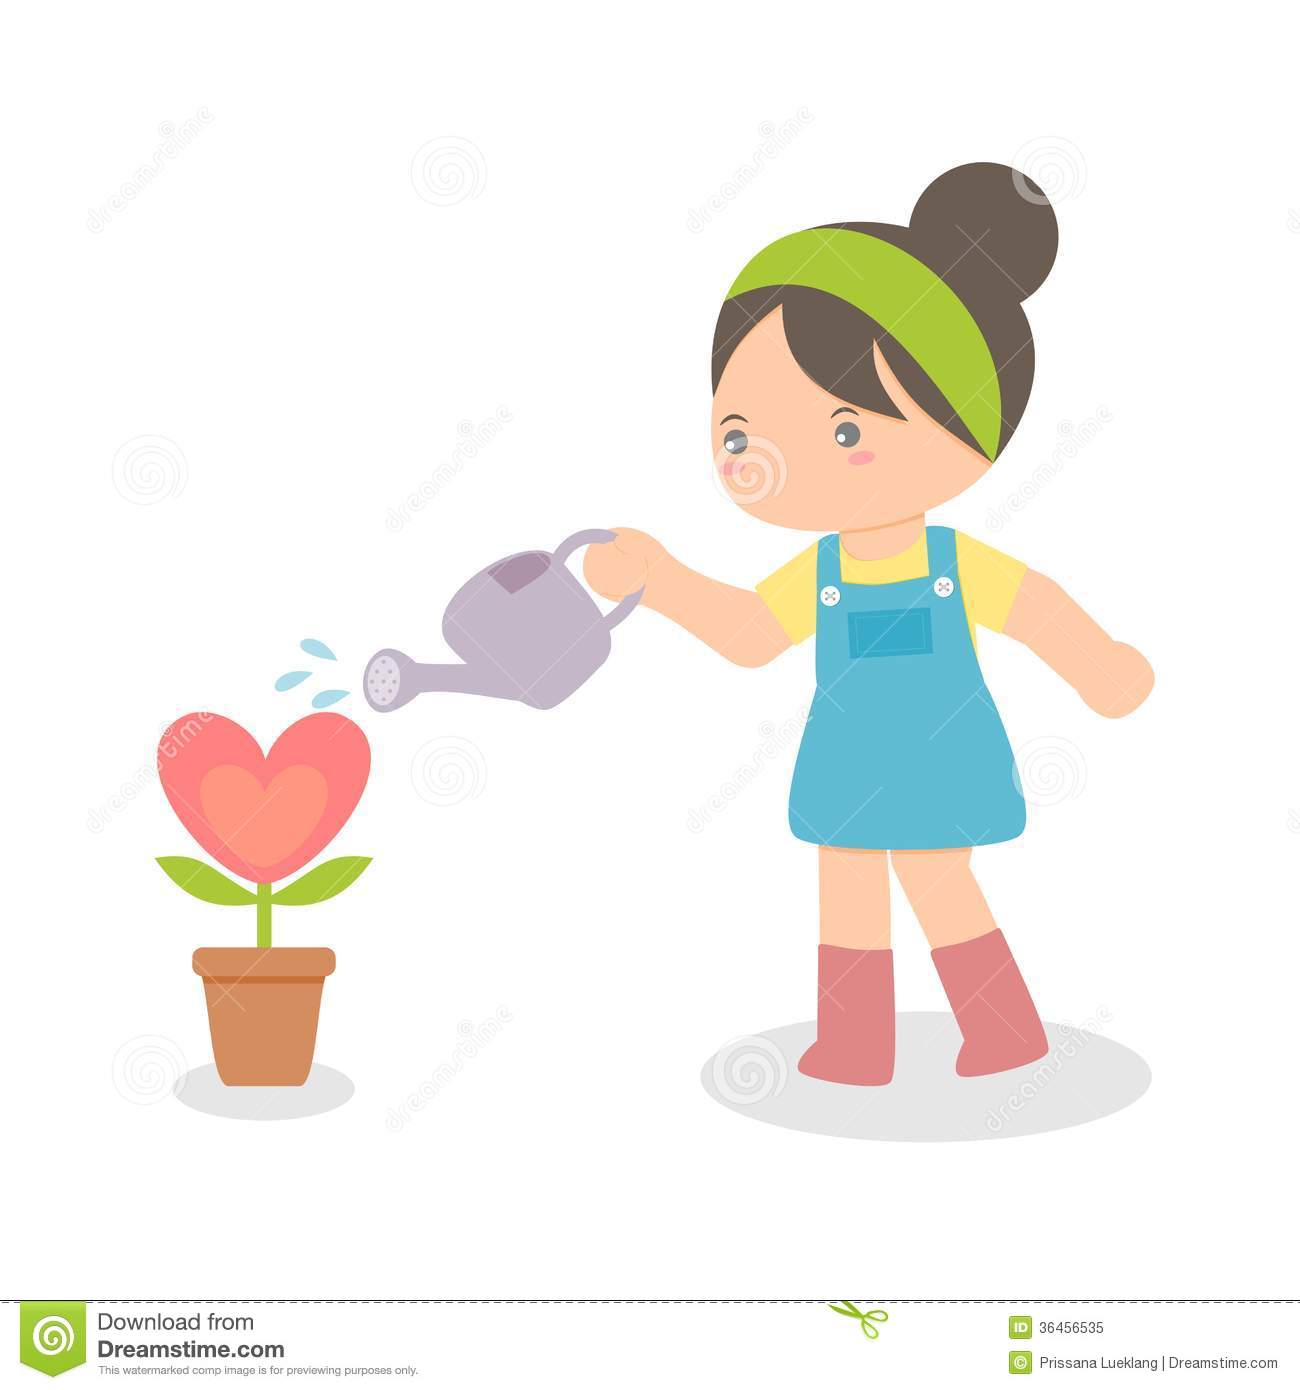 Seed planting cliparts free. Seedling clipart kid